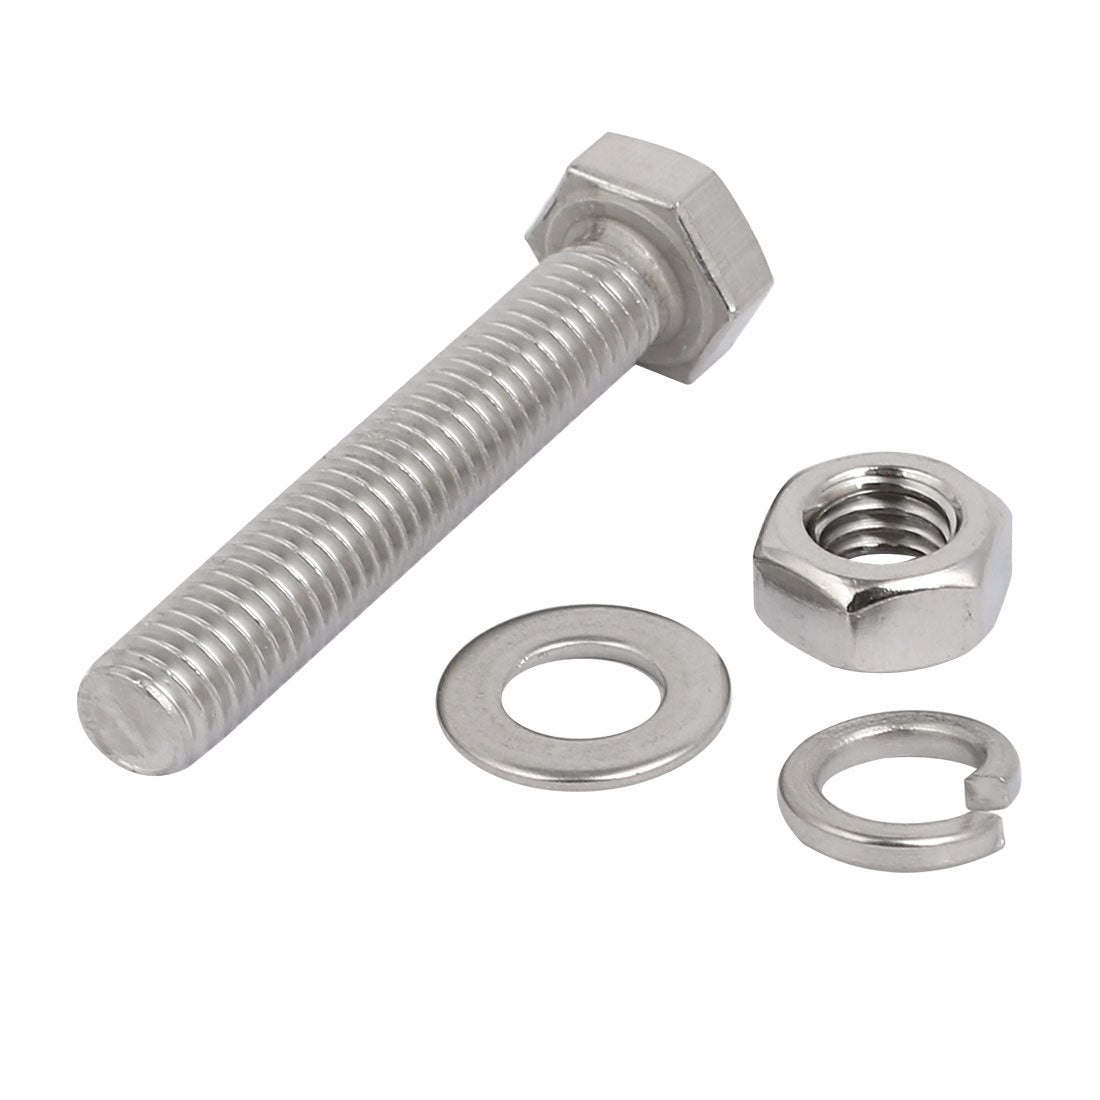 uxcell Uxcell 10 Set M8x45mm 304 Stainless Steel Hex Bolts w Nuts and Washers Assortment Kit